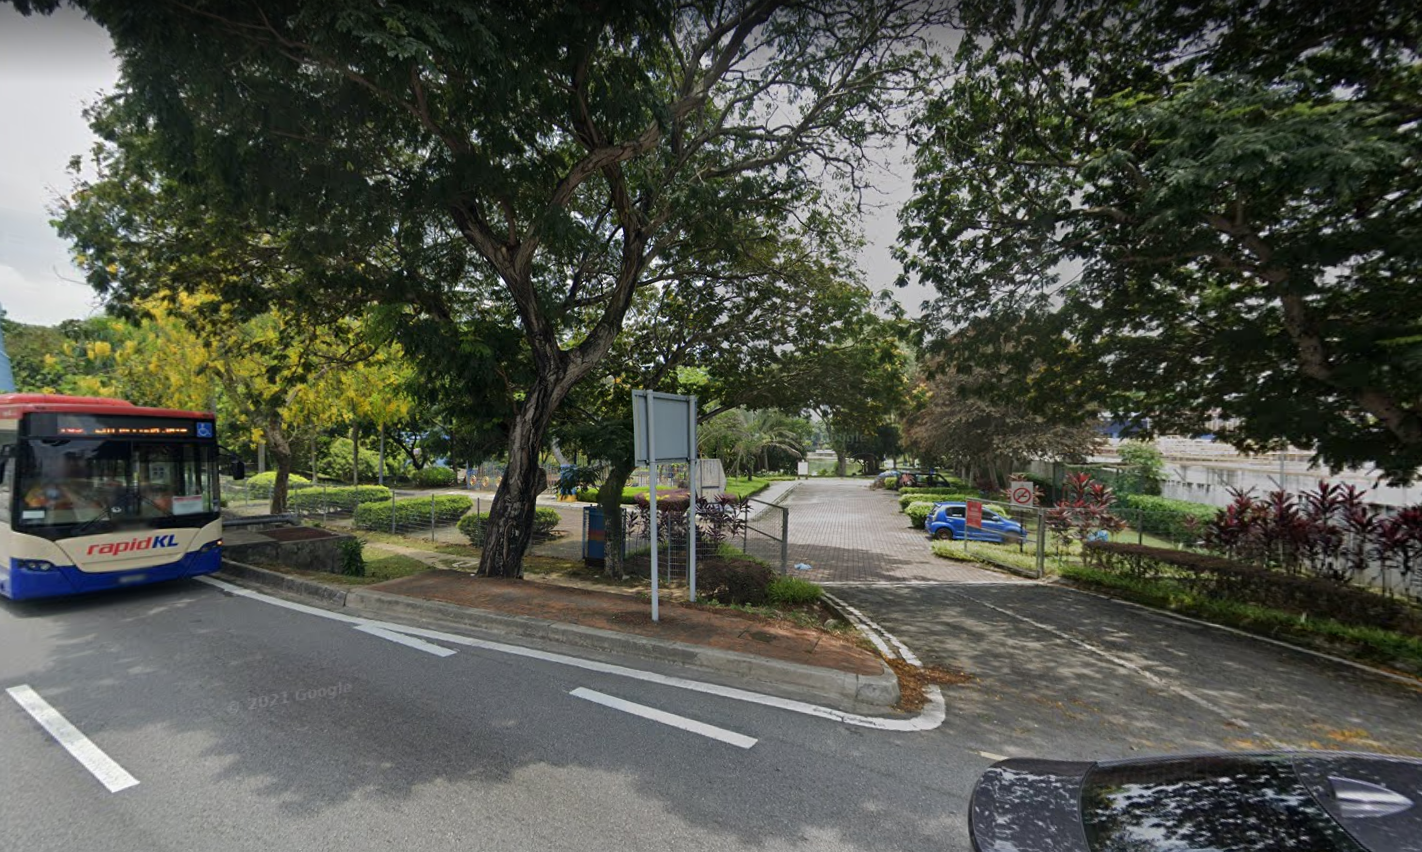 A separate entrance can be accessed by pedestrians a little further down the LDP, but this is not clearly marked. Image credit: Google Maps